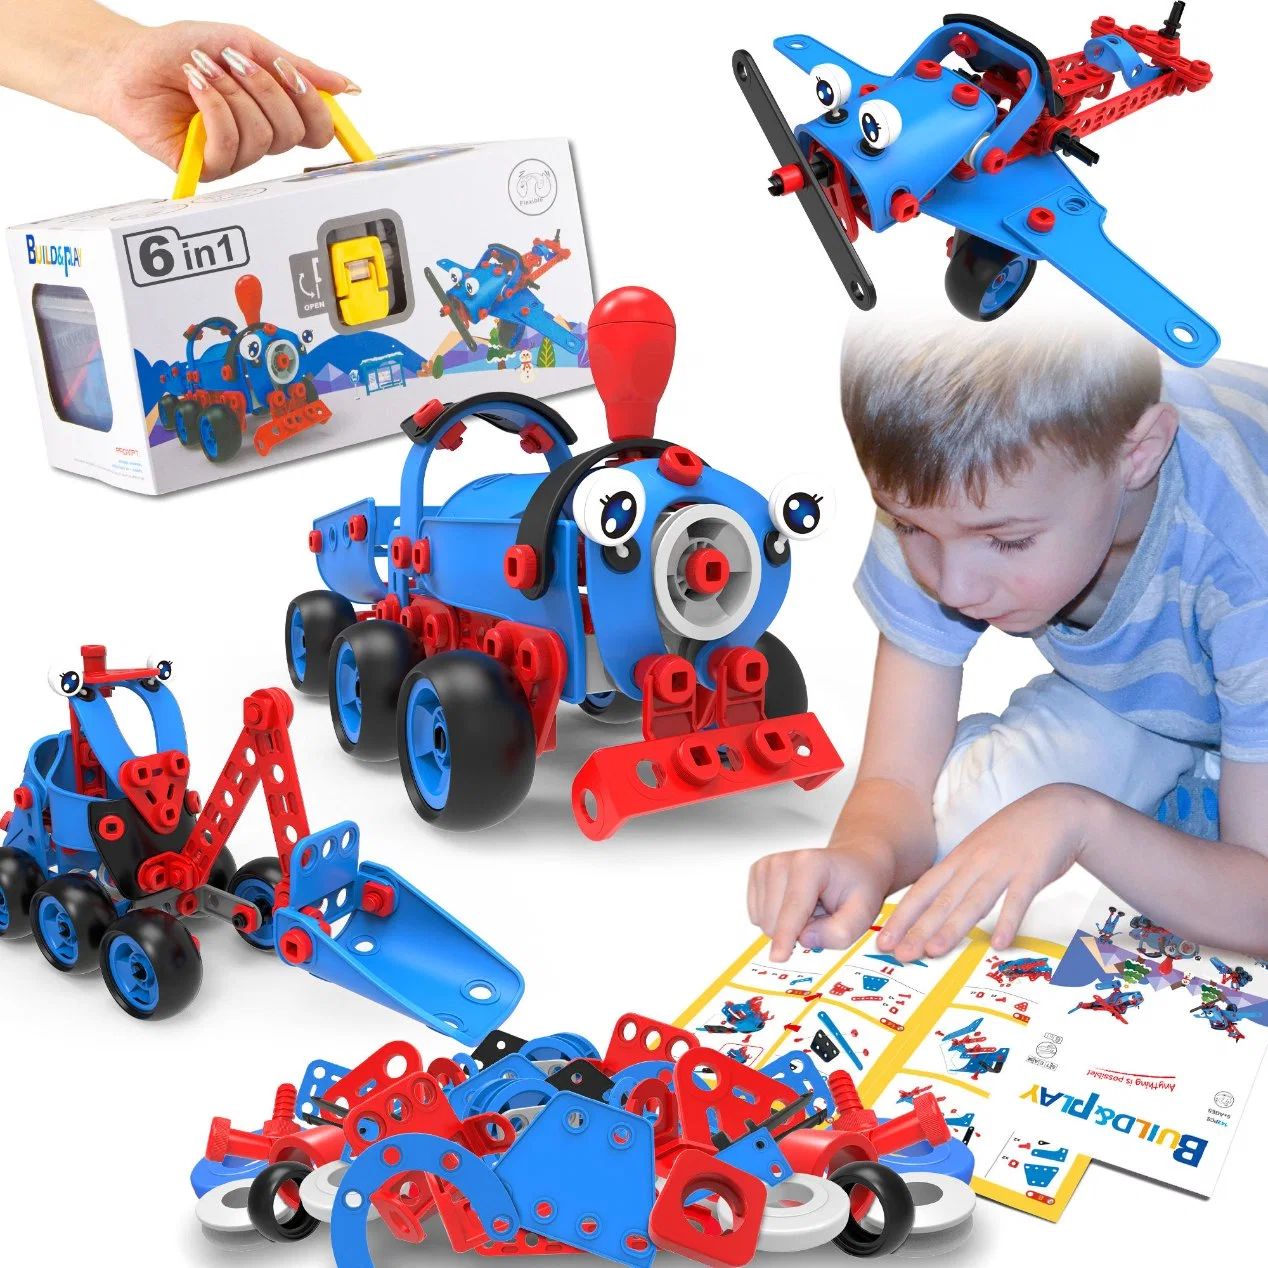 142PCS 6-in-1 DIY Building Kit Educational Construction Play Set Children Fine Motor Skill Training Creative Robot Vehicle Screw and Nut Assembly Kids Stem Toy